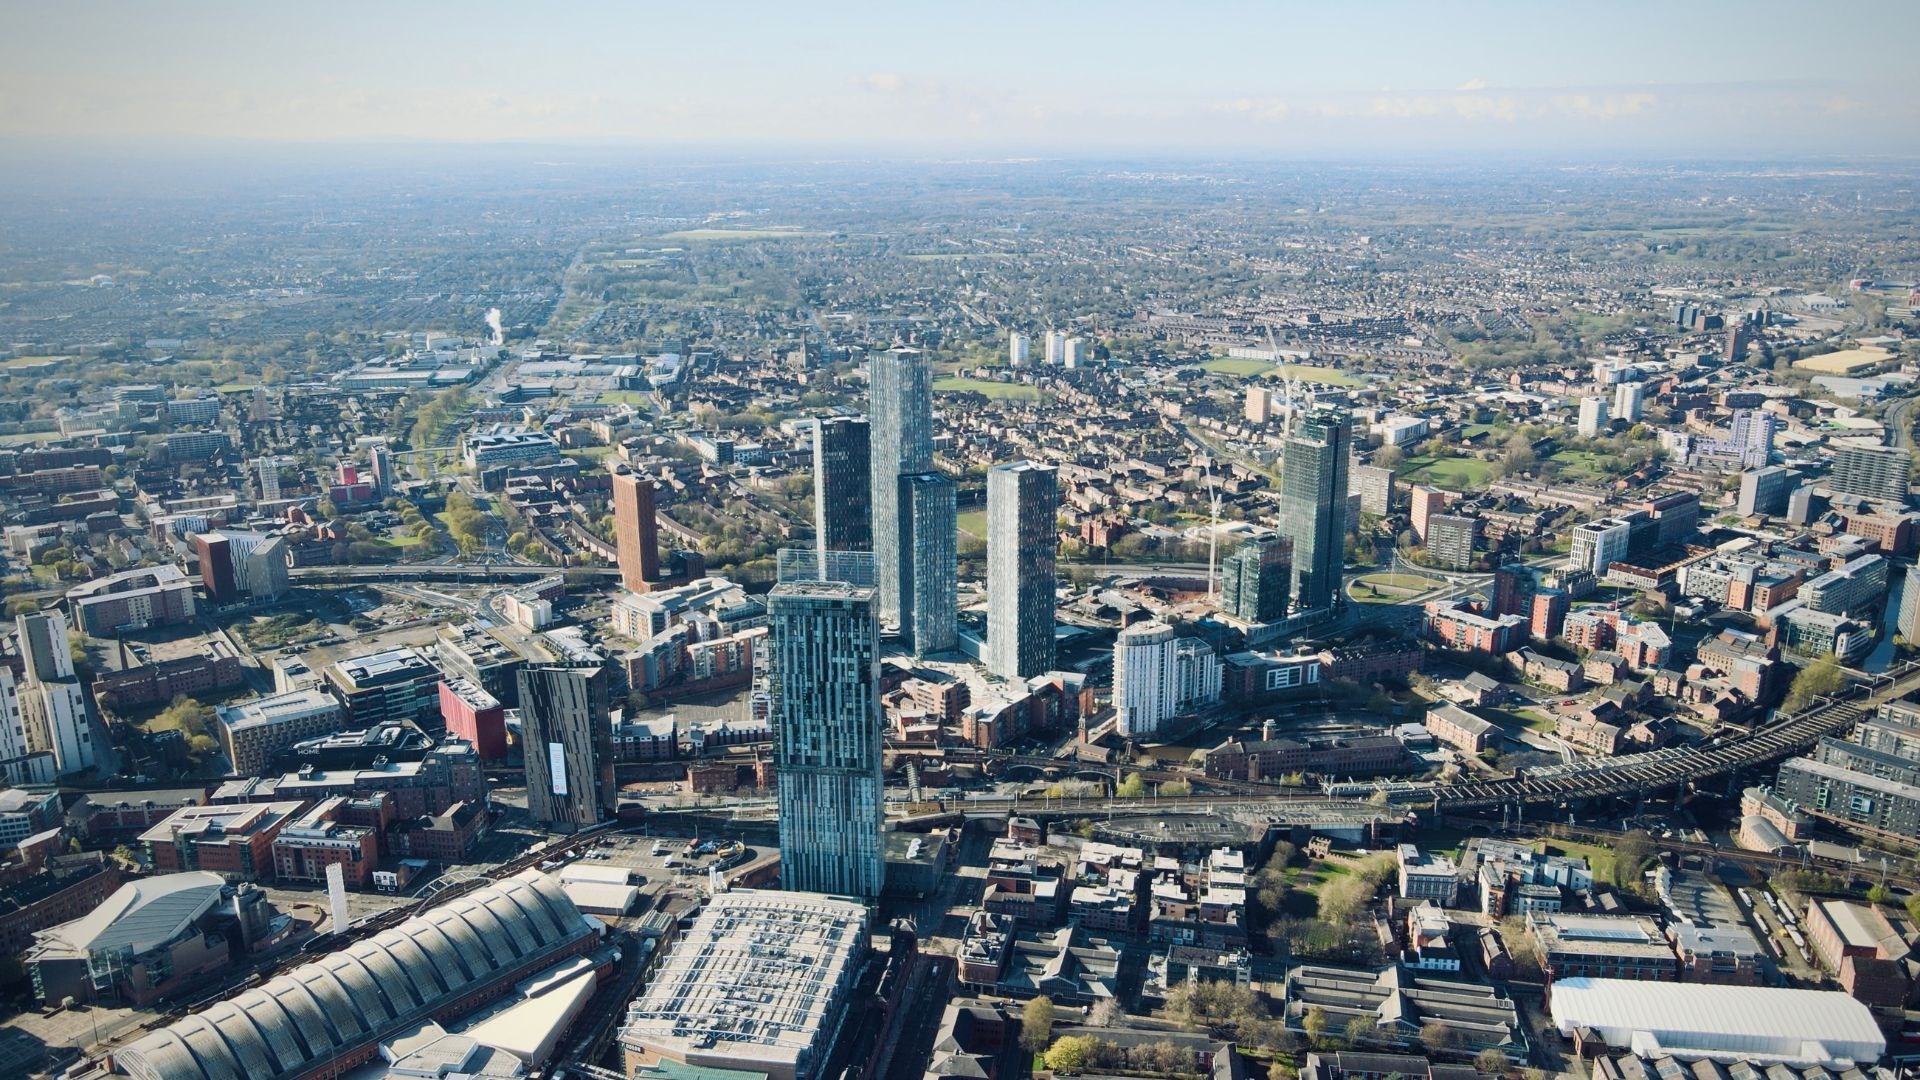 an aerial view of the city of Manchester